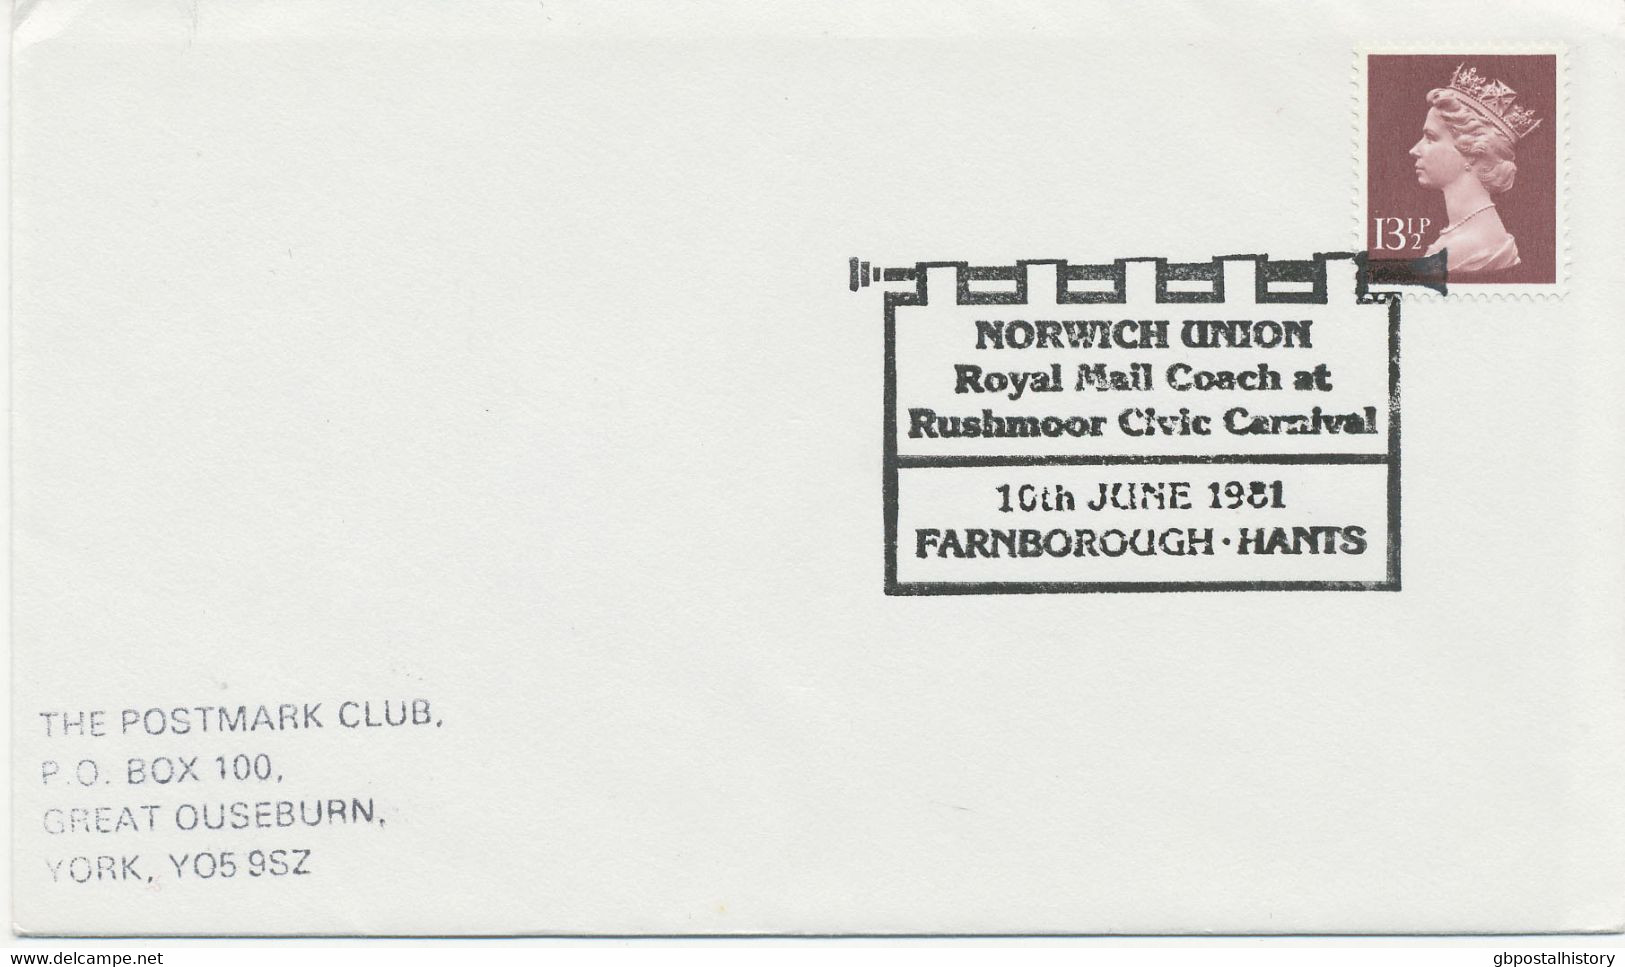 GB SPECIAL EVENT POSTMARK NORWICH UNION - Royal Mail Coach At Rushmoor Civic Carnival - 10th JUNE 1981 - FARNBOROUGH - H - Diligences